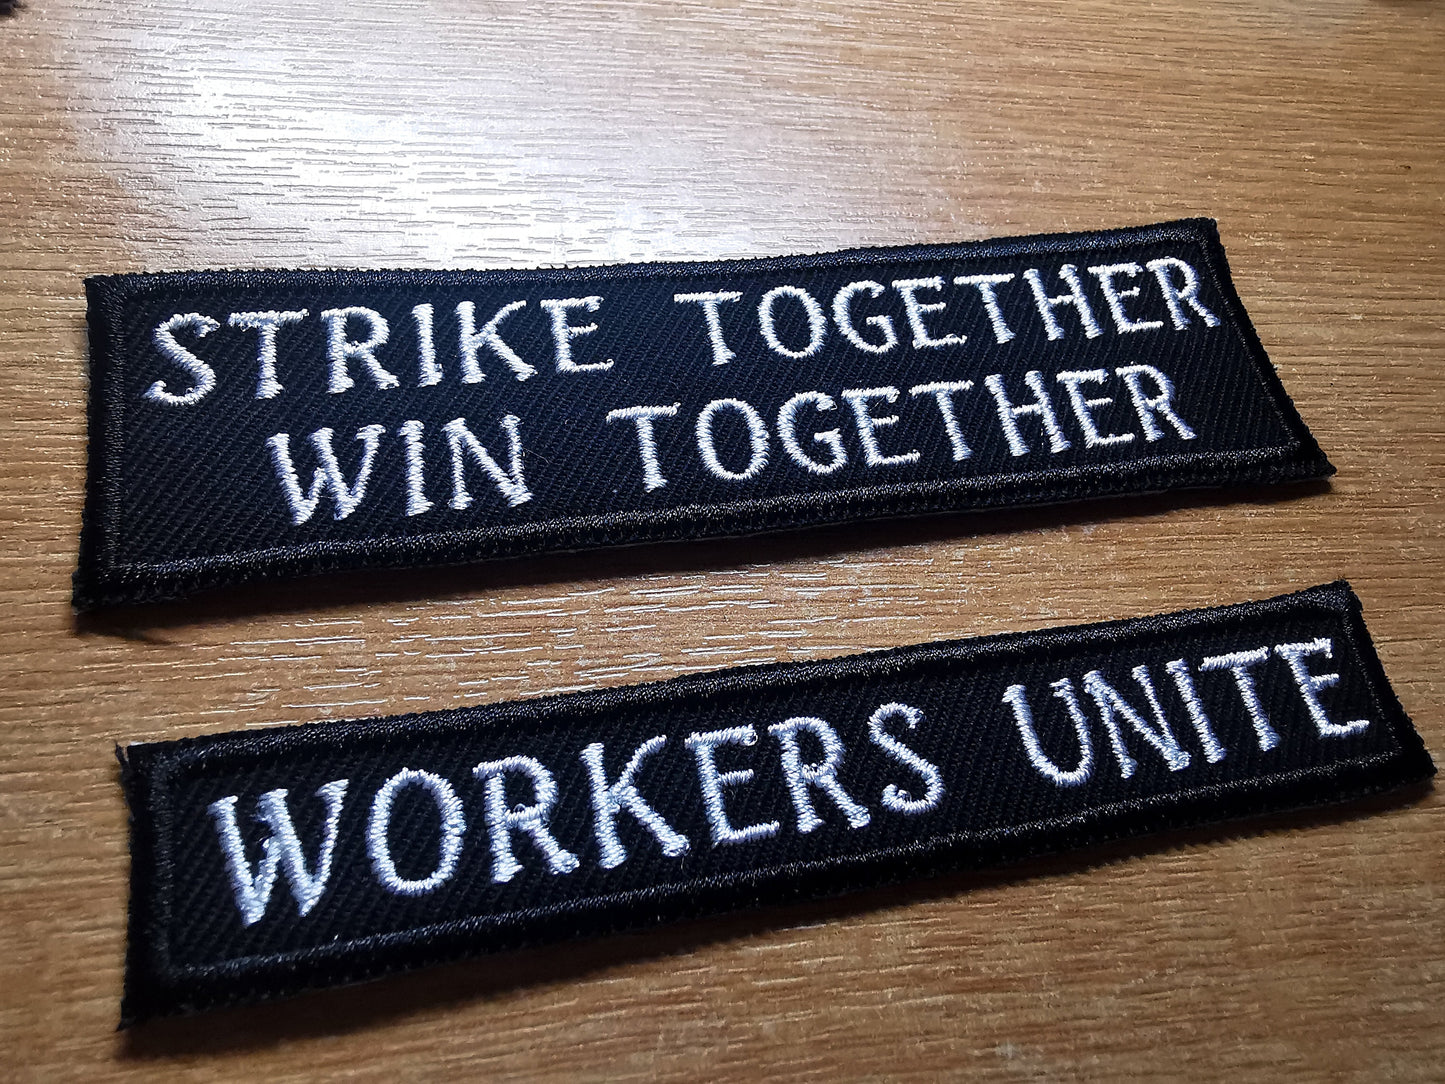 Pro Strike and Unions Workers Embroidered Iron On Patch Politics Punk